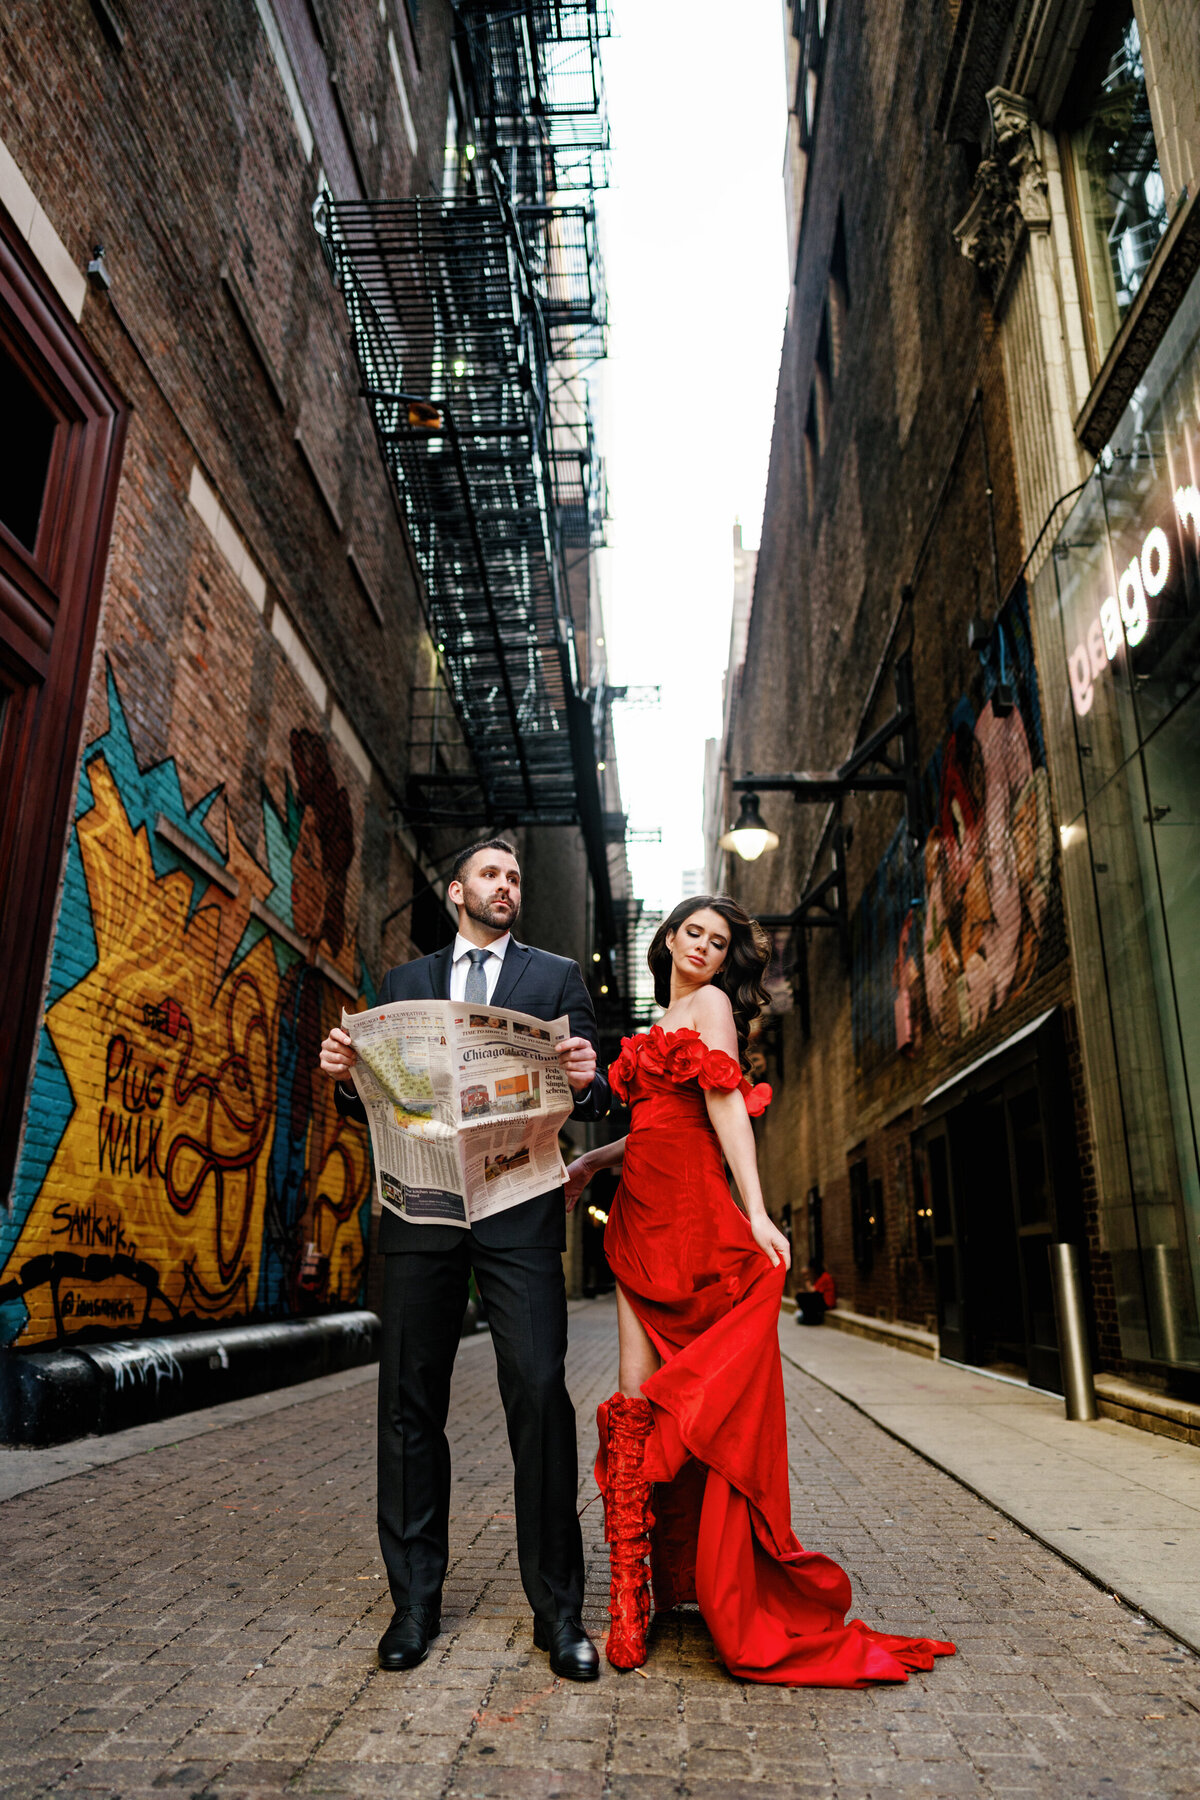 Aspen-Avenue-Chicago-Wedding-Photographer-Union-Station-Chicago-Theater-Engagement-Session-Timeless-Romantic-Red-Dress-Editorial-Stemming-From-Love-Bry-Jean-Artistry-The-Bridal-Collective-True-to-color-Luxury-FAV-117